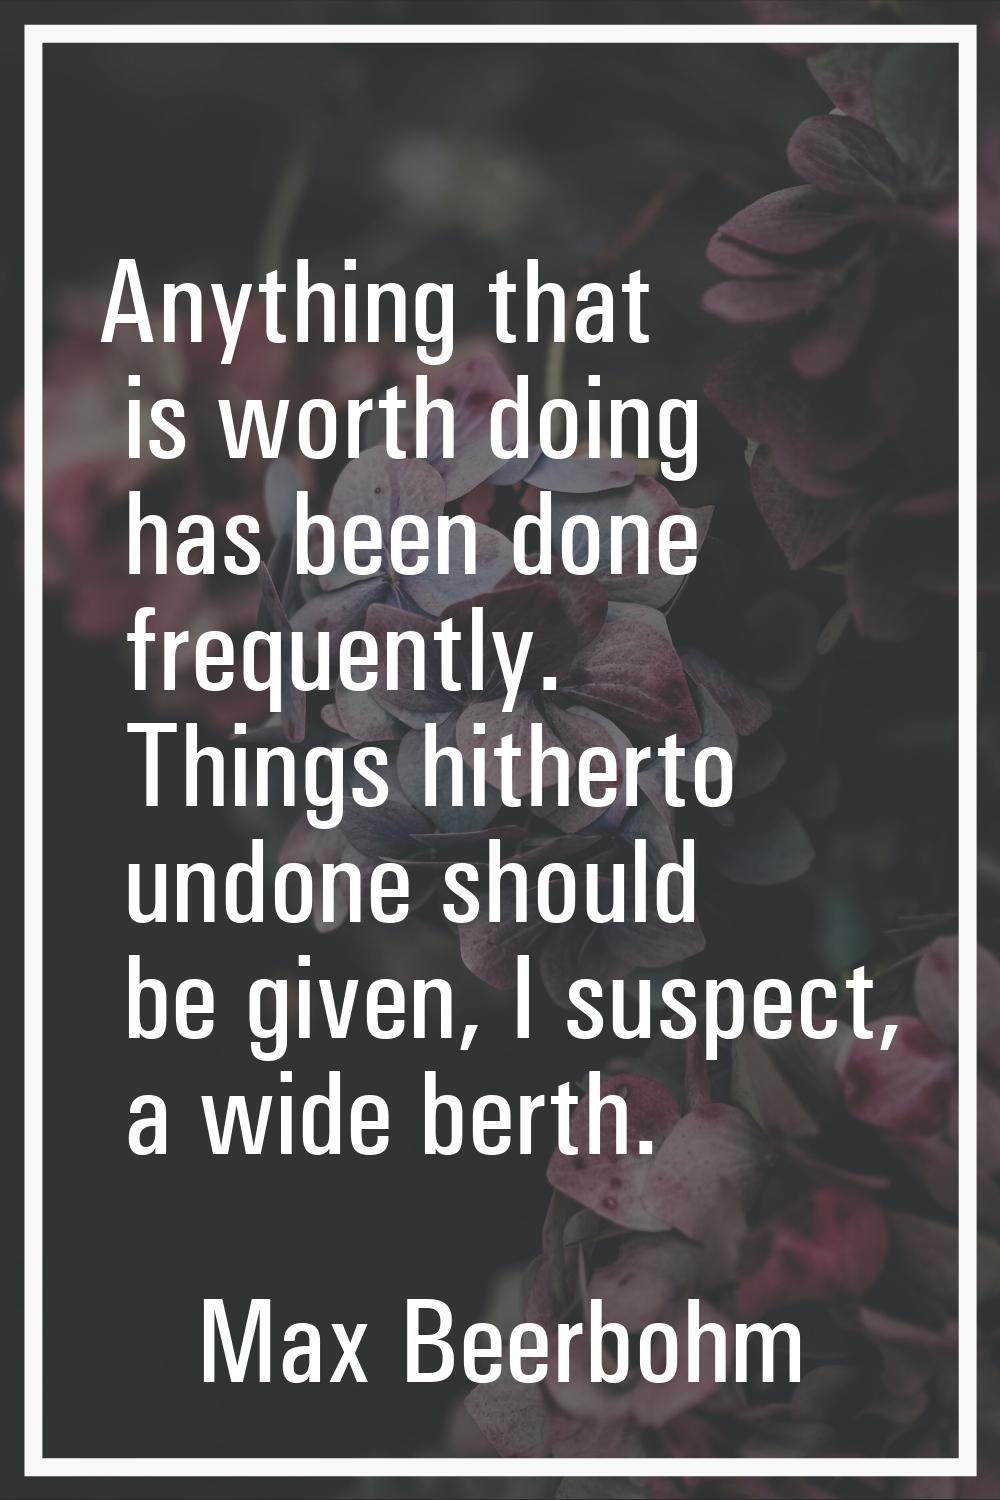 Anything that is worth doing has been done frequently. Things hitherto undone should be given, I su